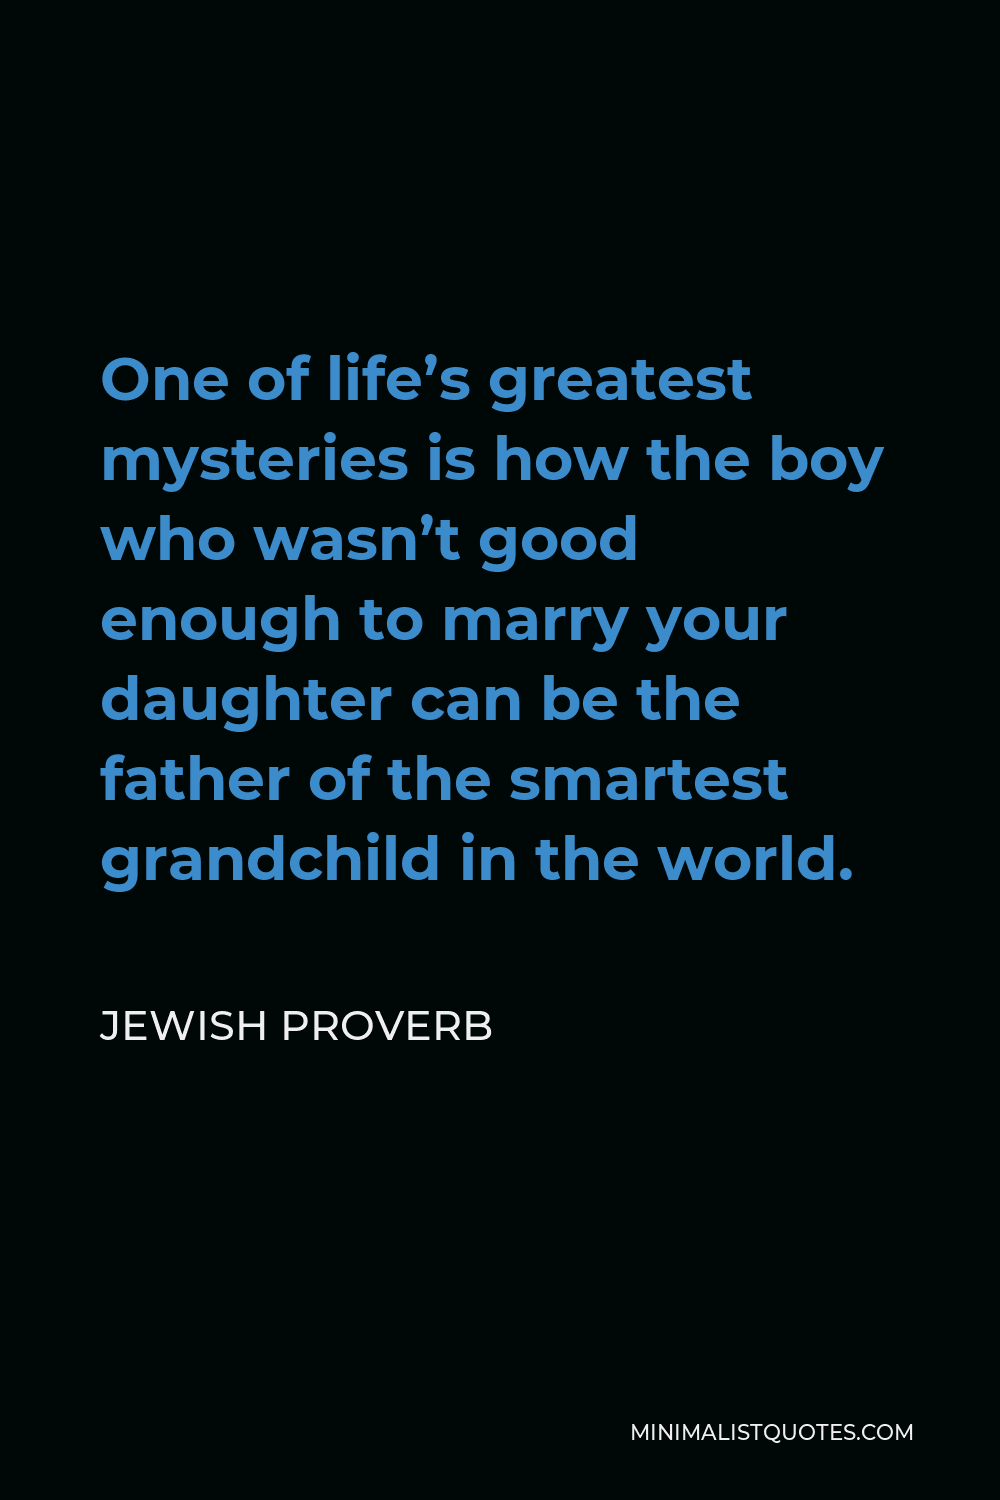 Jewish Proverb Quote - One of life’s greatest mysteries is how the boy who wasn’t good enough to marry your daughter can be the father of the smartest grandchild in the world.